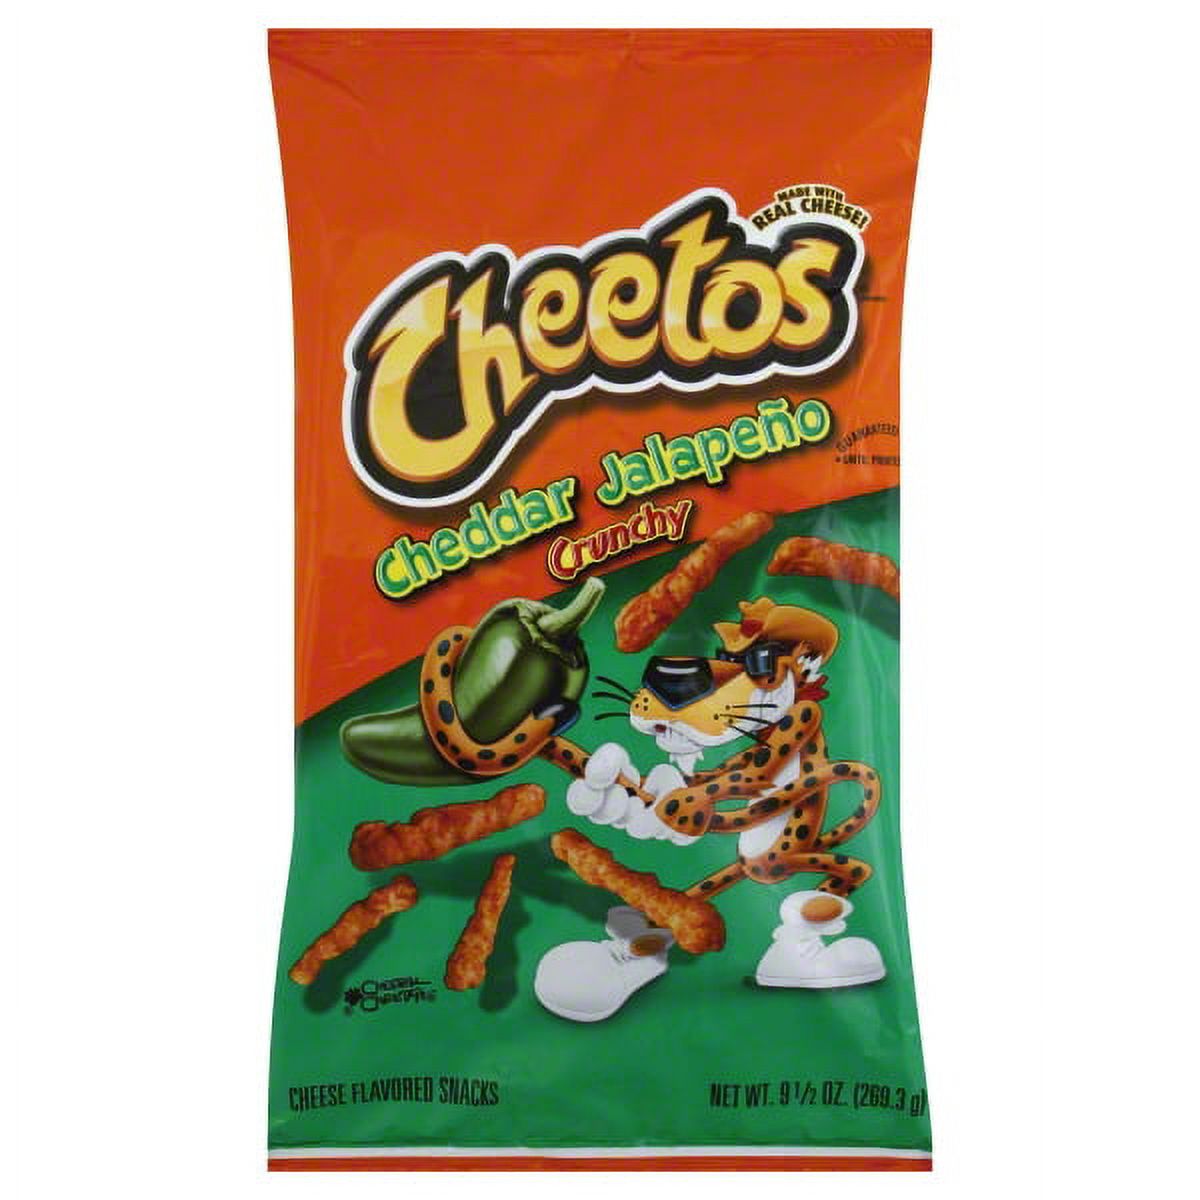 Cheetos Crunchy Cheddar Jalape&ntilde;o Cheese Flavored Snacks, 9.5 Oz. - image 1 of 1